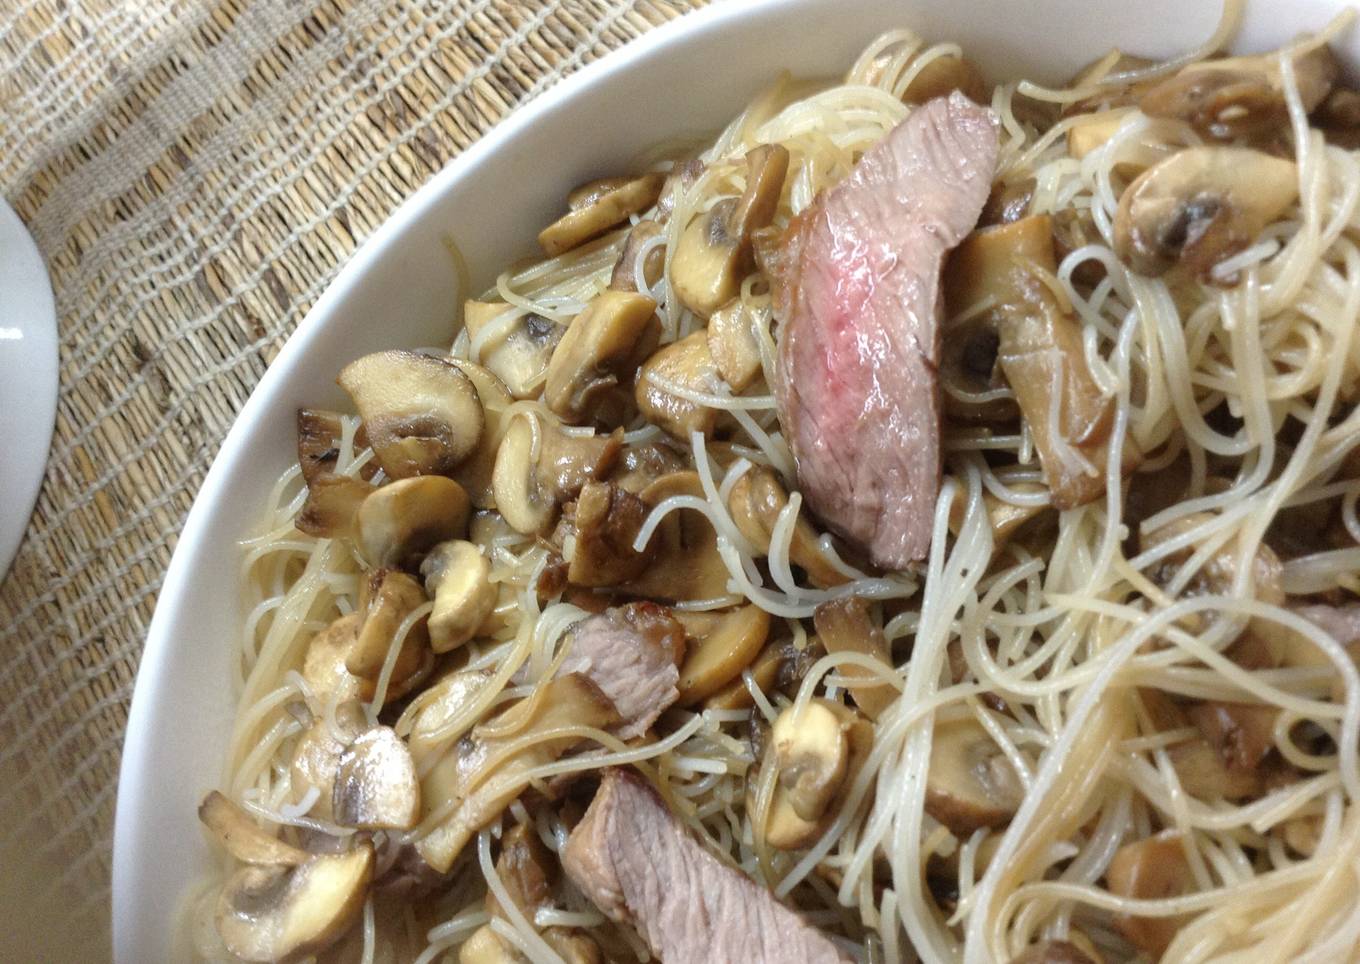 blushing beef slices and mushrooms in rice noodles